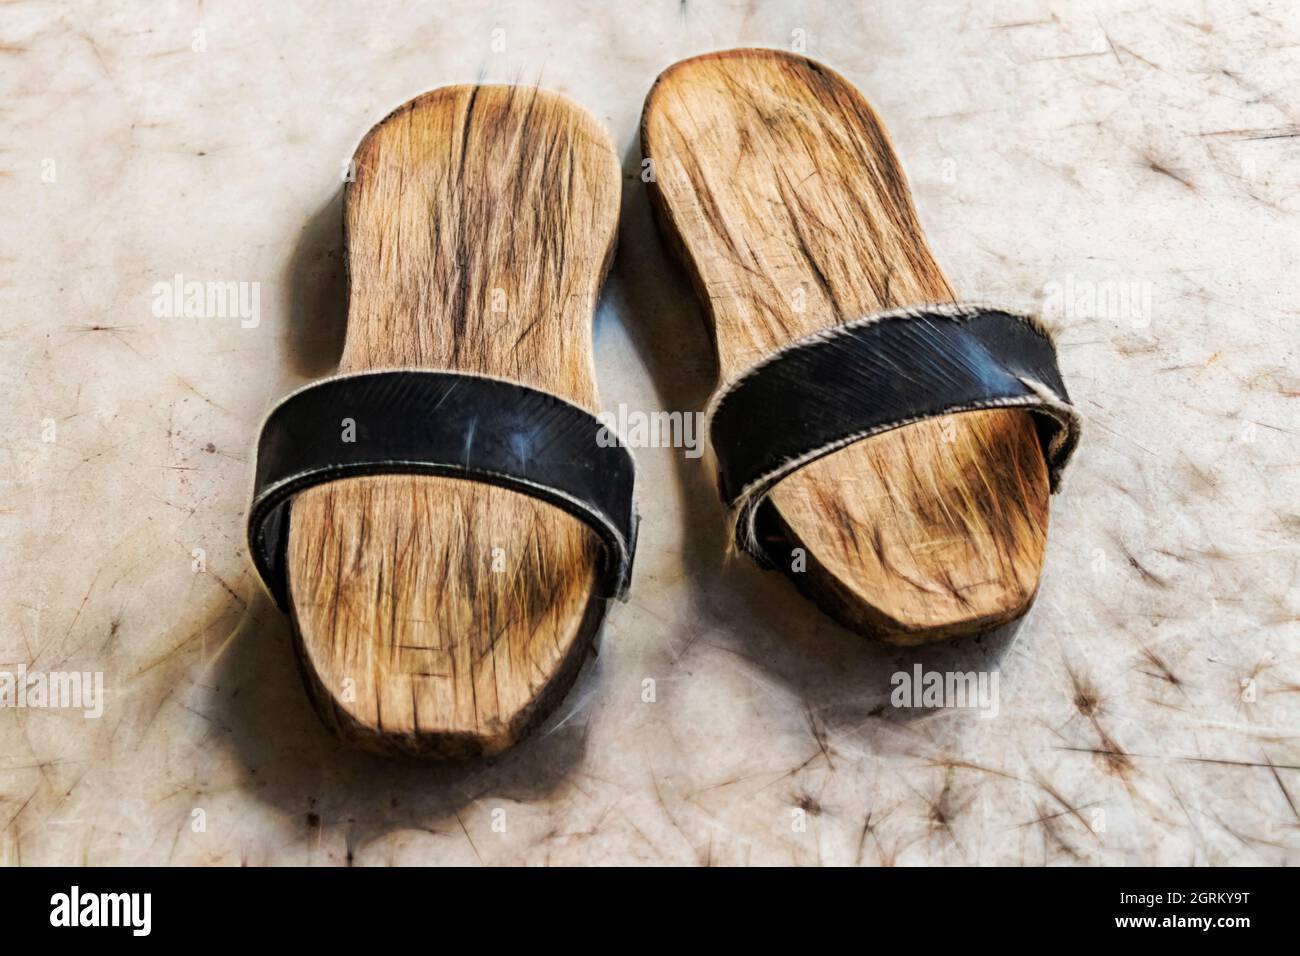 A Pair Of Clogs For Turkish Bath.shoes With A Thick Wooden Sole Stock Photo  - Alamy